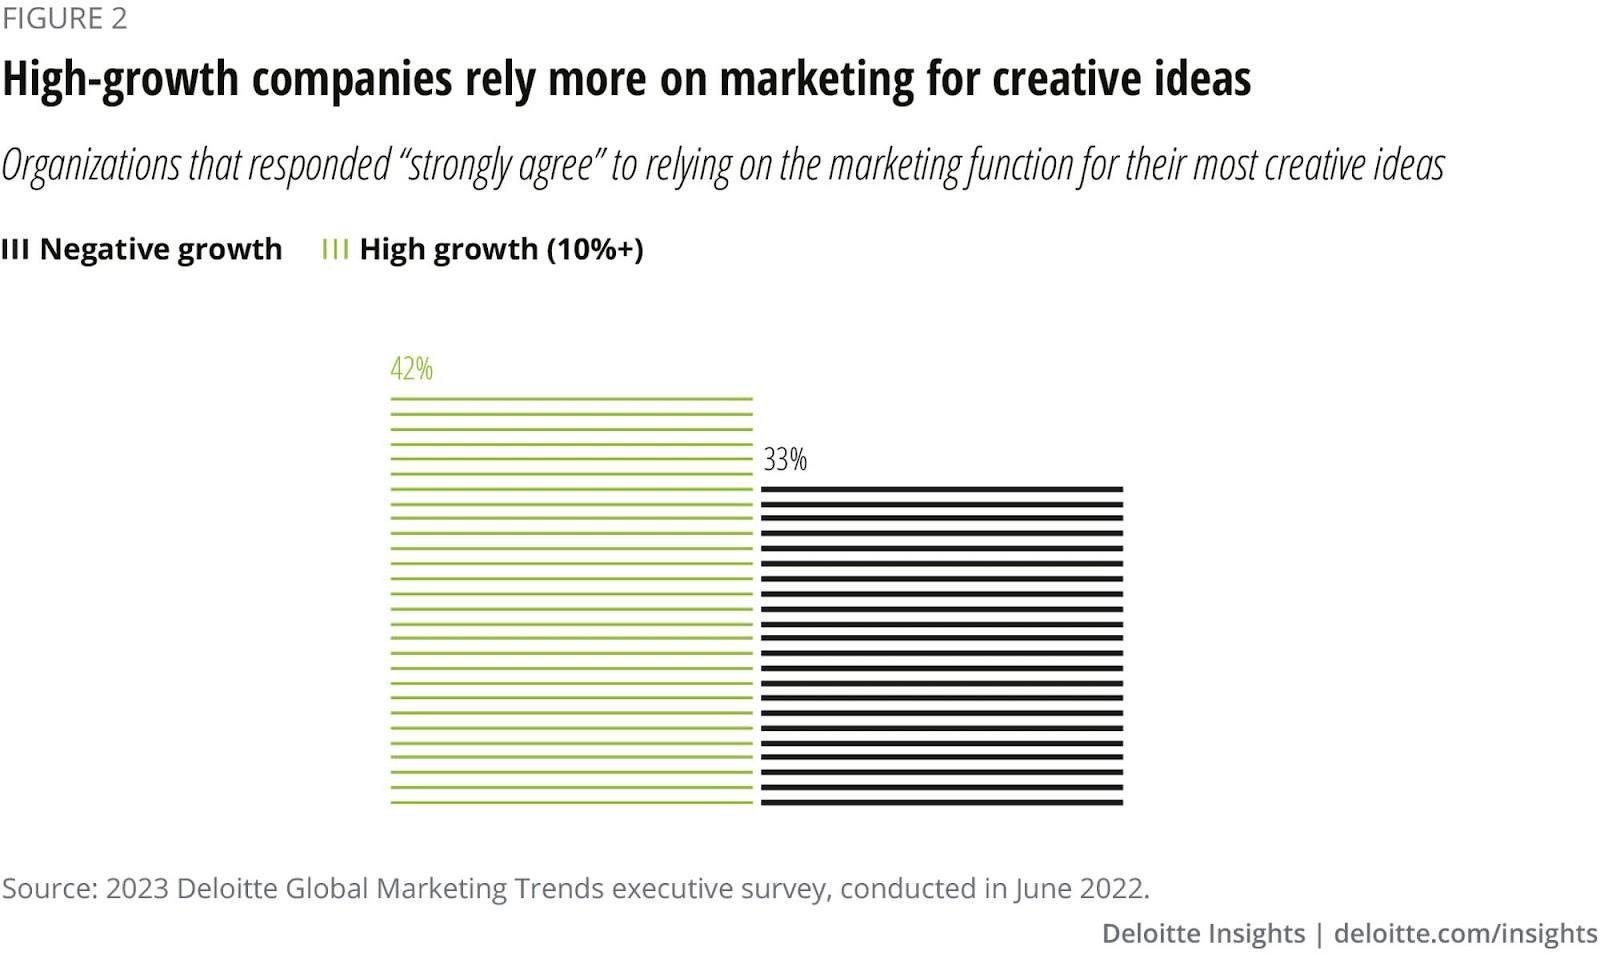 Deloitte Insights found that 42% of high-growth companies rely on marketing for their most creative ideas